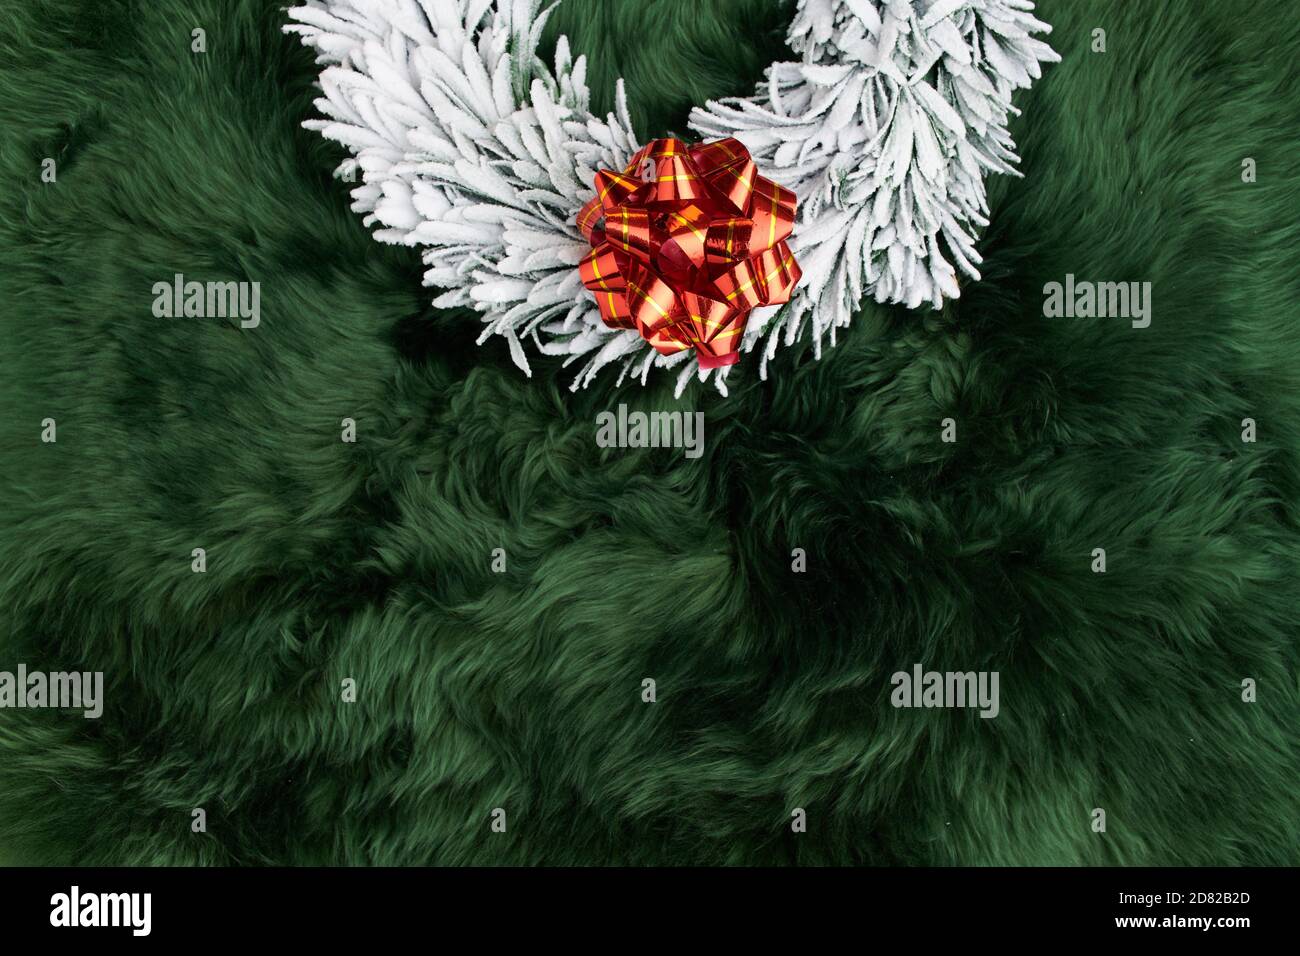 Merry Christmas. flat lay with wreath on green rug background. Stock Photo